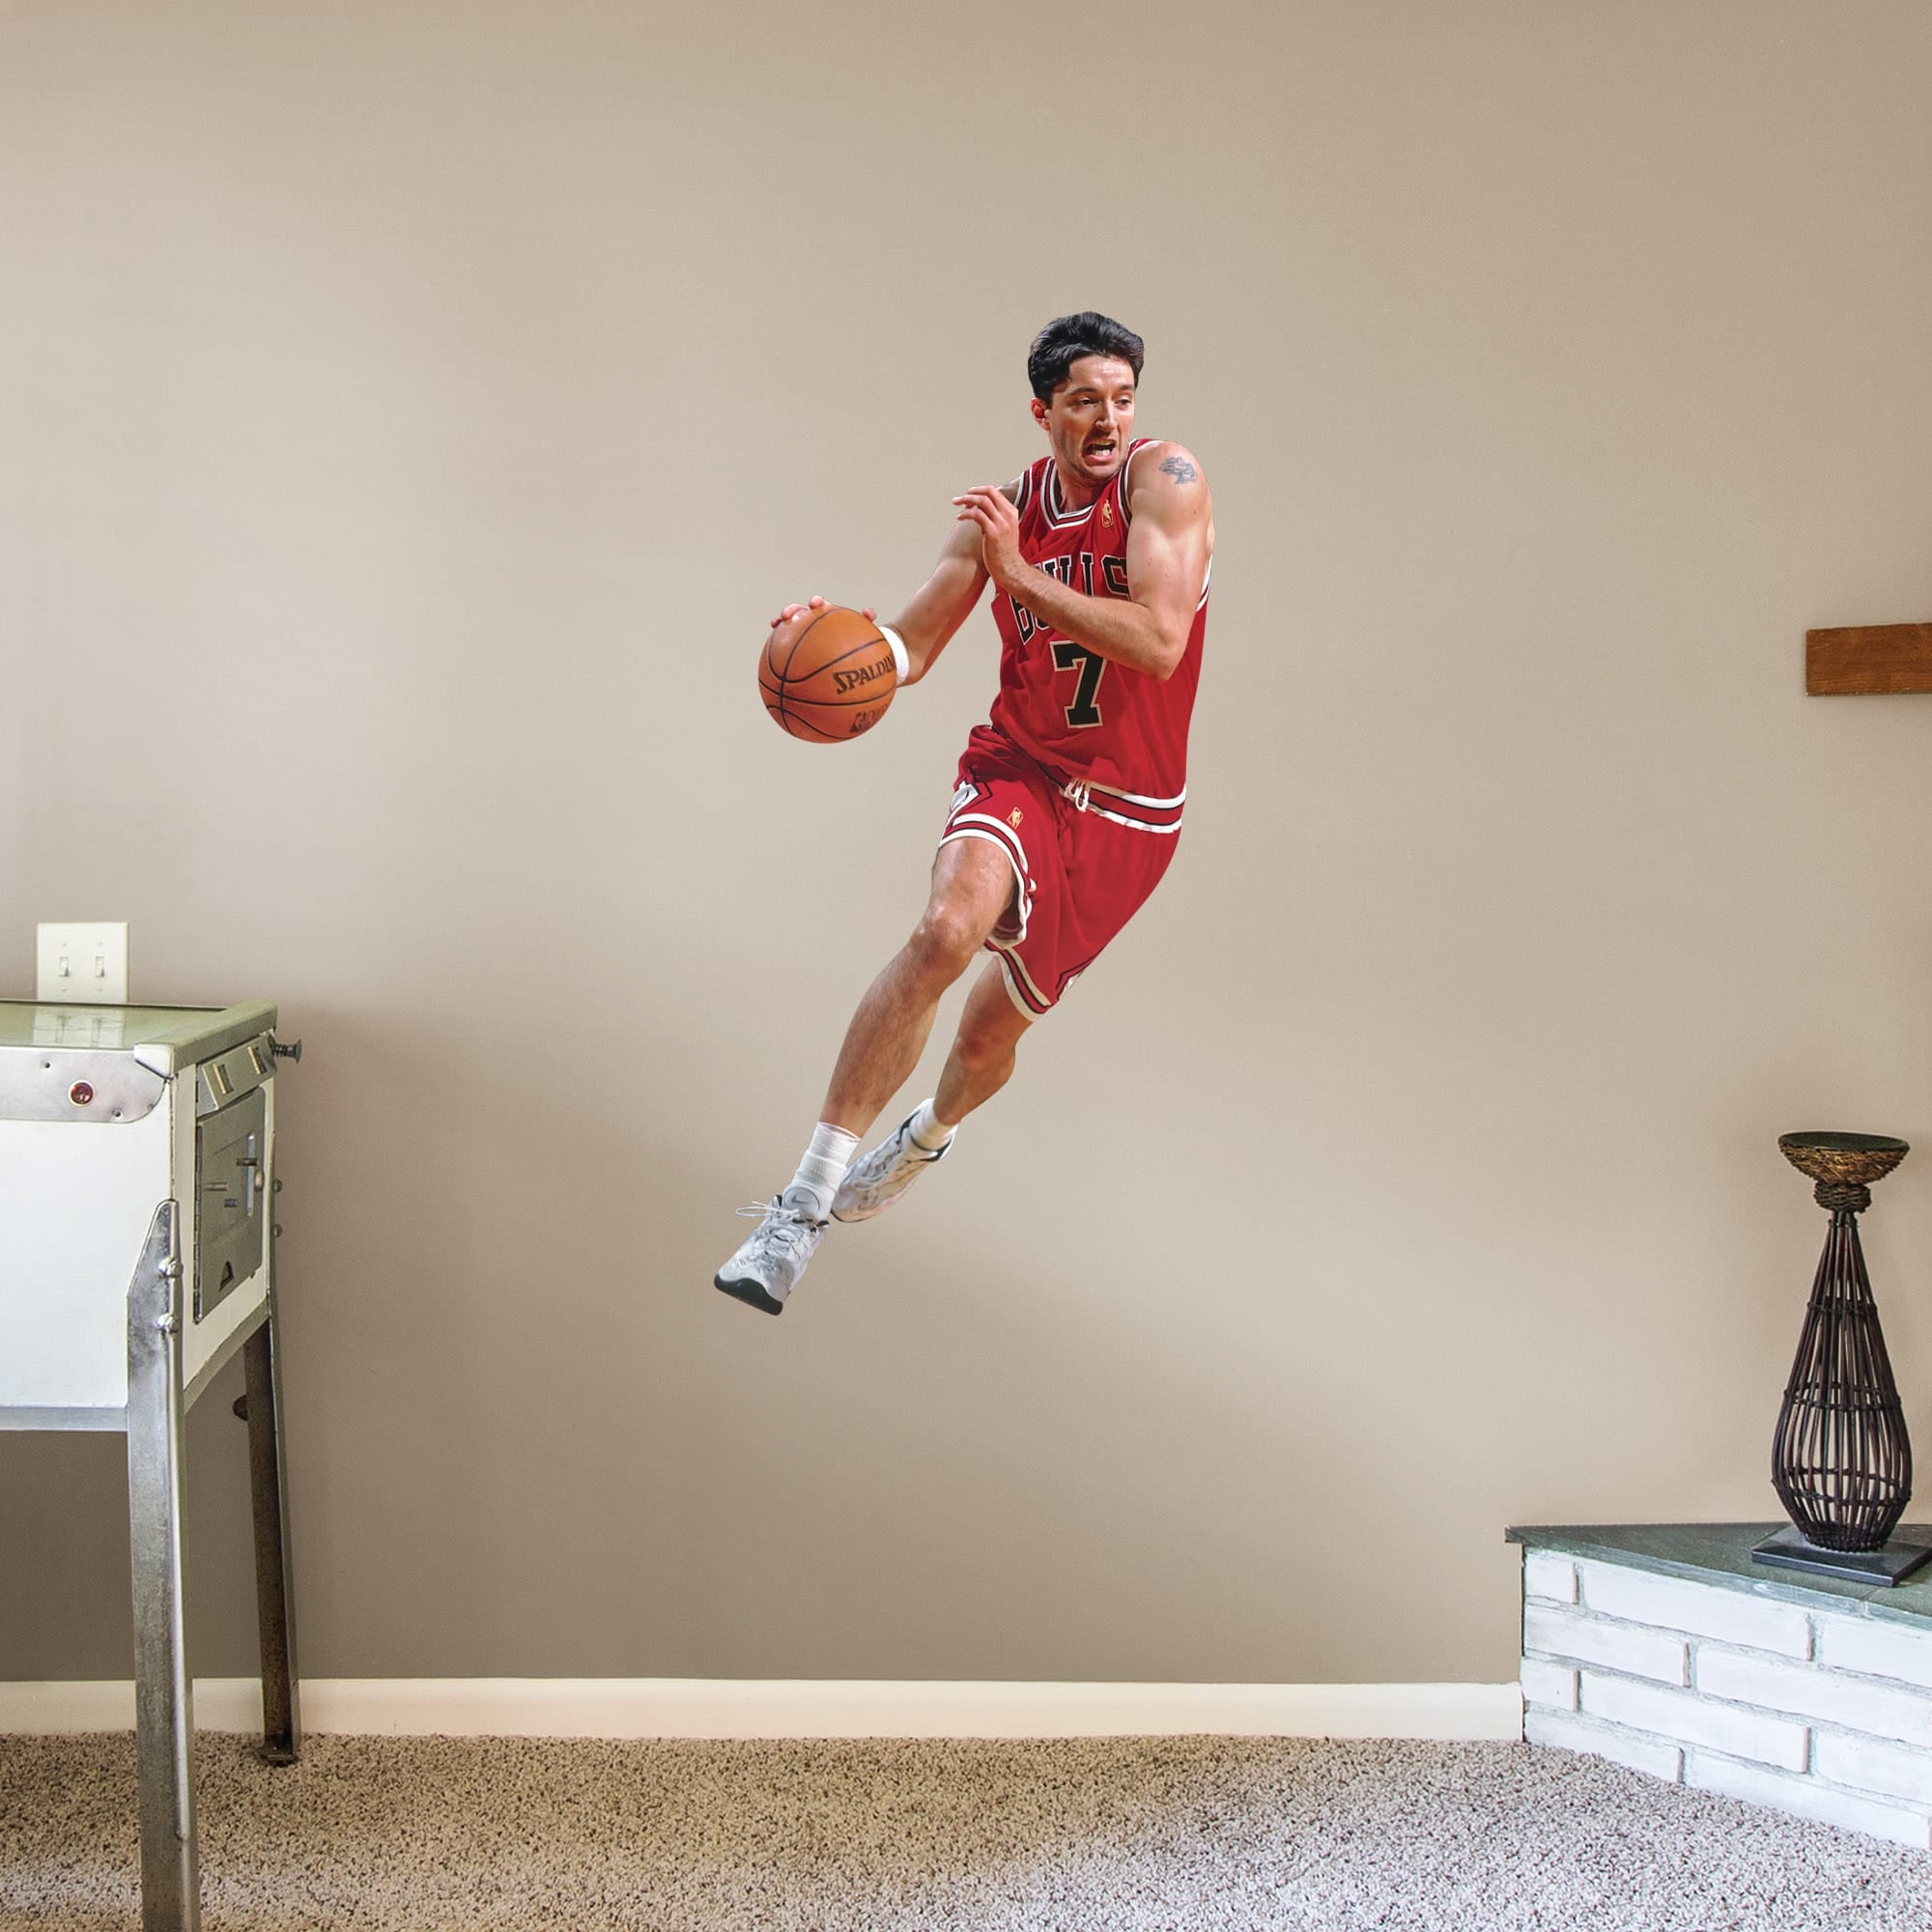 Toni Kukoc for Chicago Bulls - Officially Licensed NBA Removable Wall Decal Giant Athlete + 2 Decals (25"W x 51"H) by Fathead |